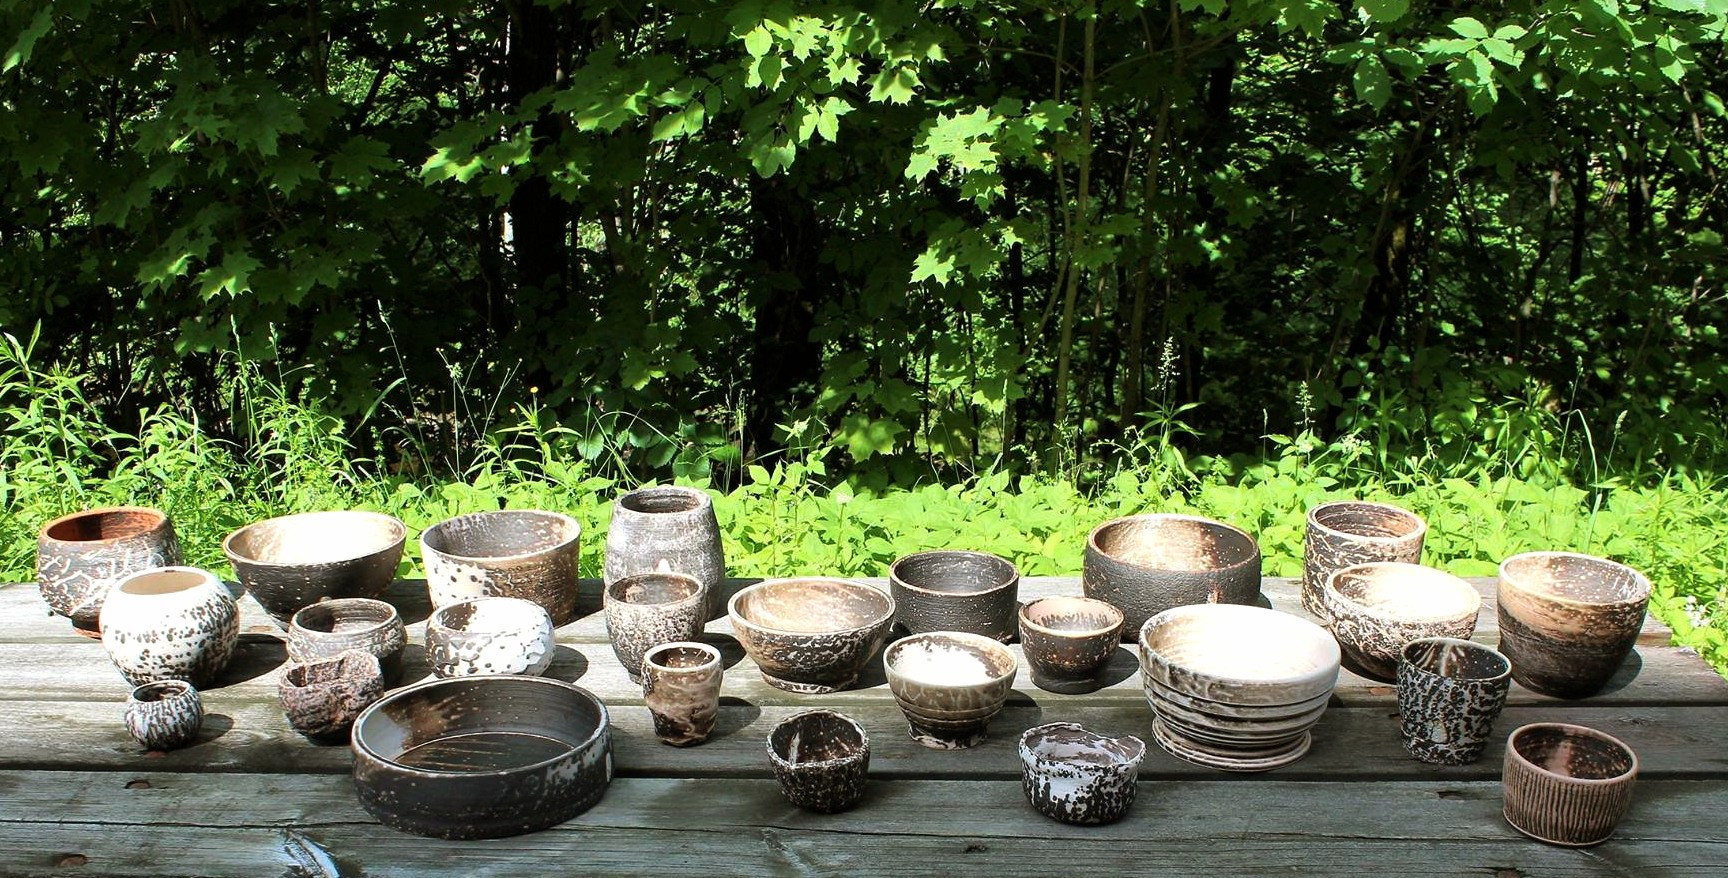 An outside table with 25 different sized and shaped brown and white ceramic bowls. In the background bright green plants and trees.